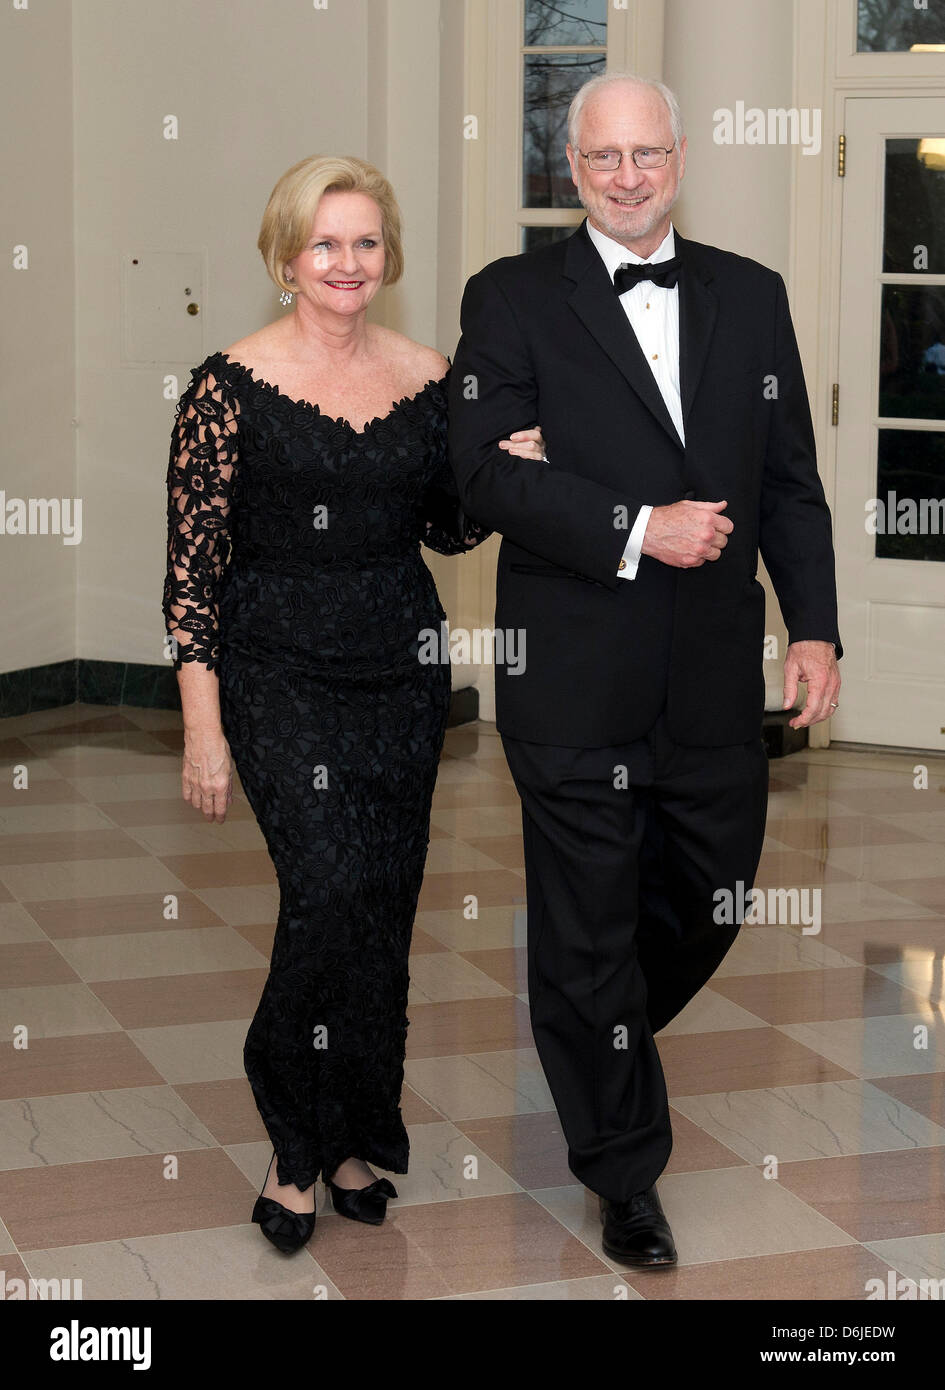 United States Senator Claire McCaskill (Democrat of Missouri) and Joseph Shepard arrive for the Official Dinner in honor of Prime Minister David Cameron of Great Britain and his wife, Samantha, at the White House in Washington, D.C. on Tuesday, March 14, 2012..Credit: Ron Sachs / CNP.(RESTRICTION: NO New York or New Jersey Newspapers or newspapers within a 75 mile radius of New Yor Stock Photo